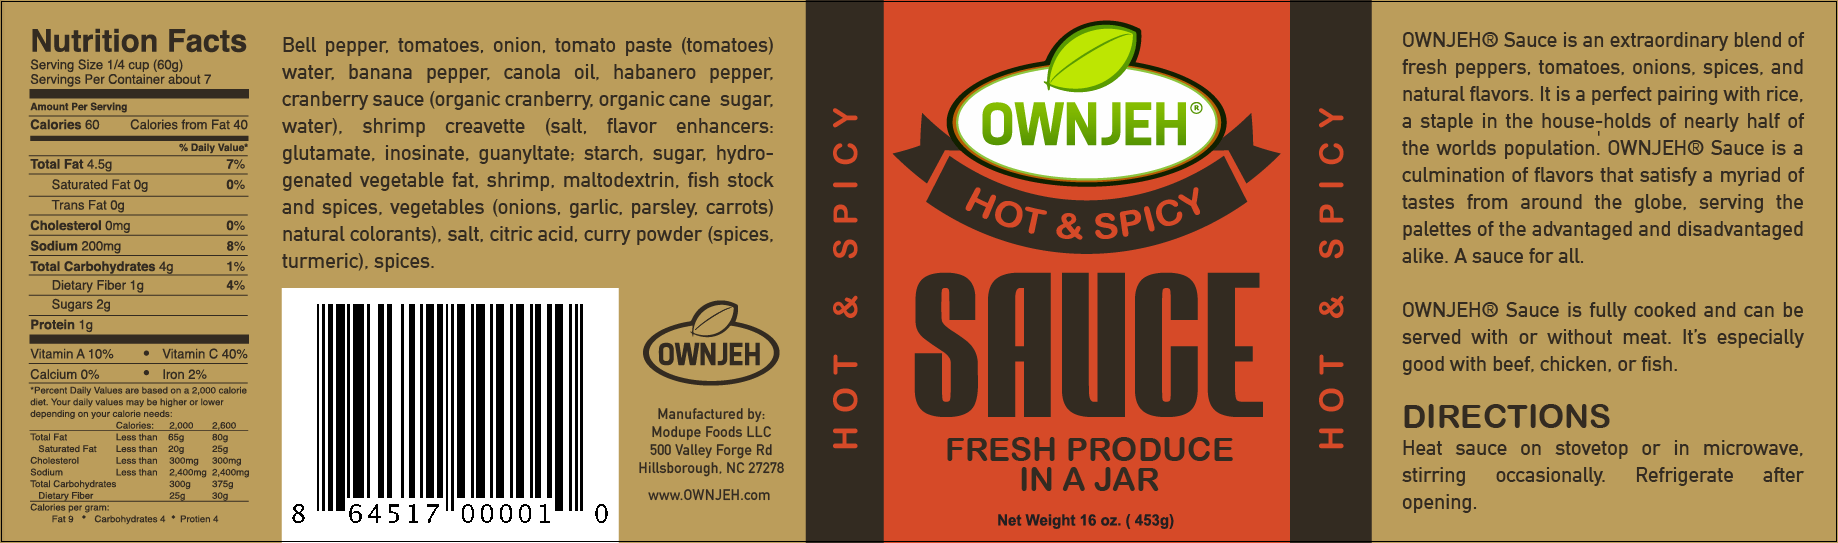 ownjeh-hot-spicy